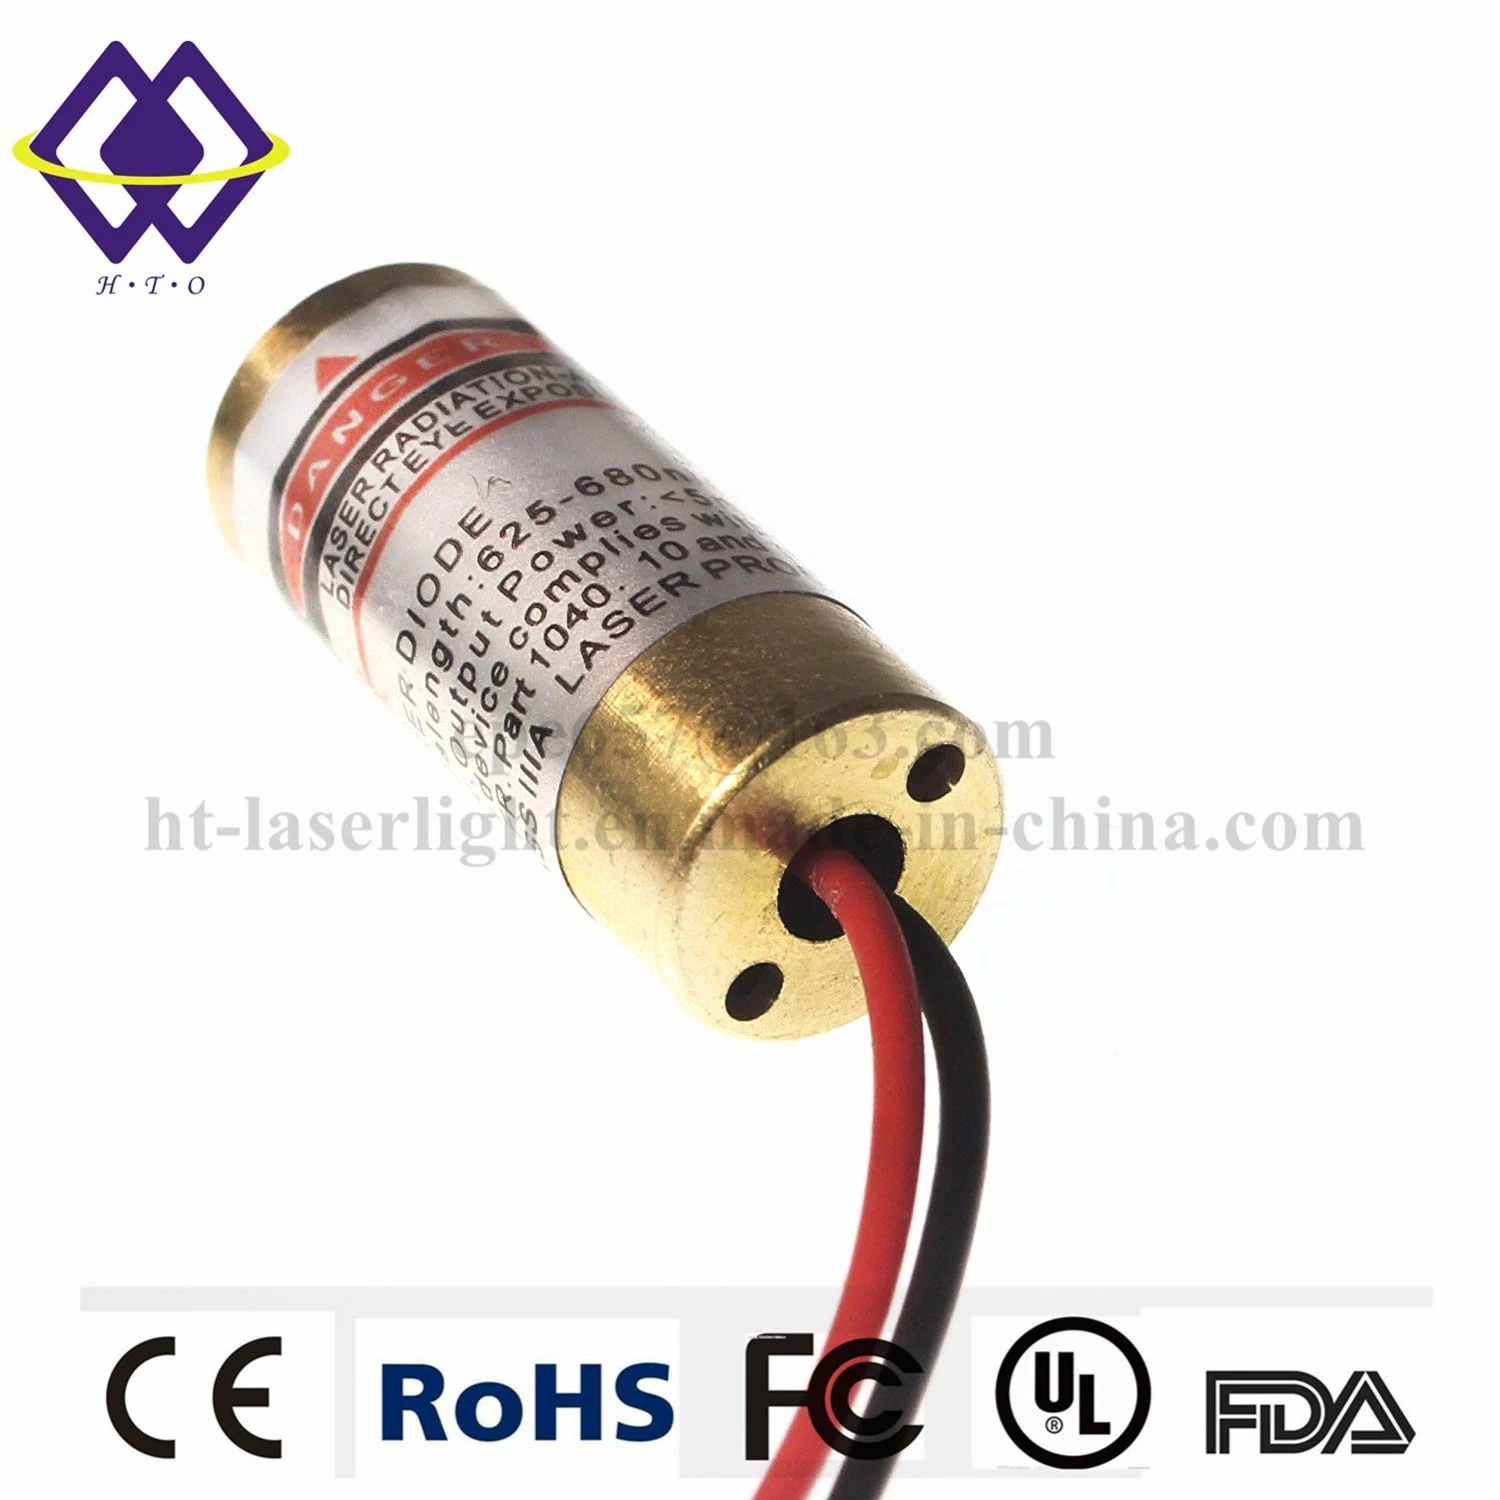 Factory Price Custom High Power 850nm 5MW~200MW IR Infrared Laser Module with Laser Diode